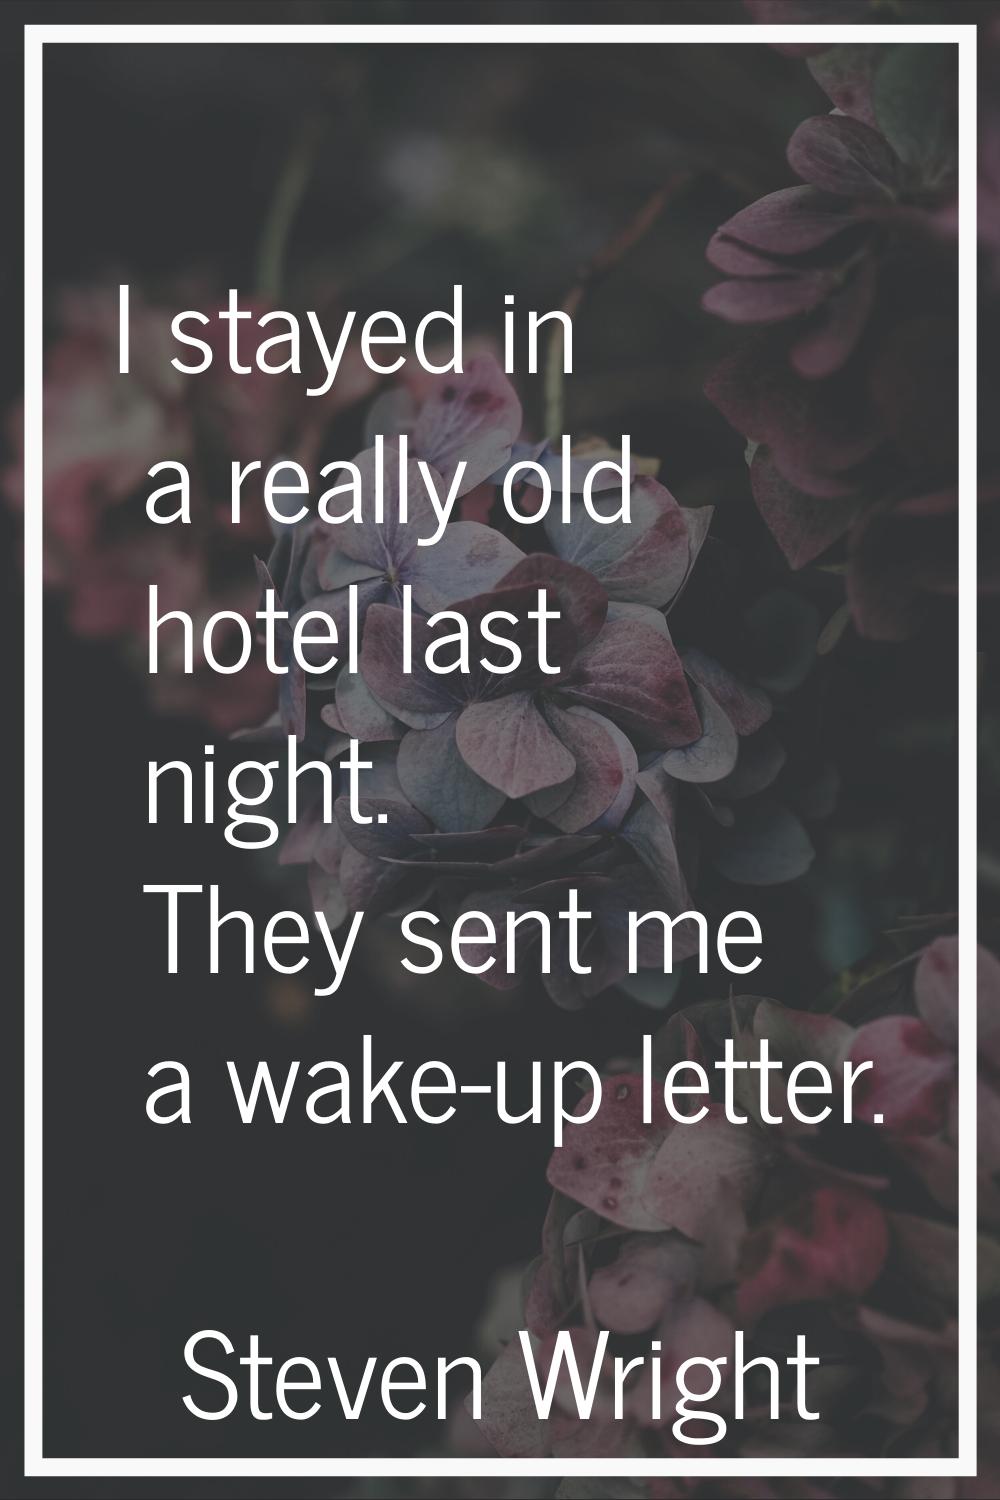 I stayed in a really old hotel last night. They sent me a wake-up letter.